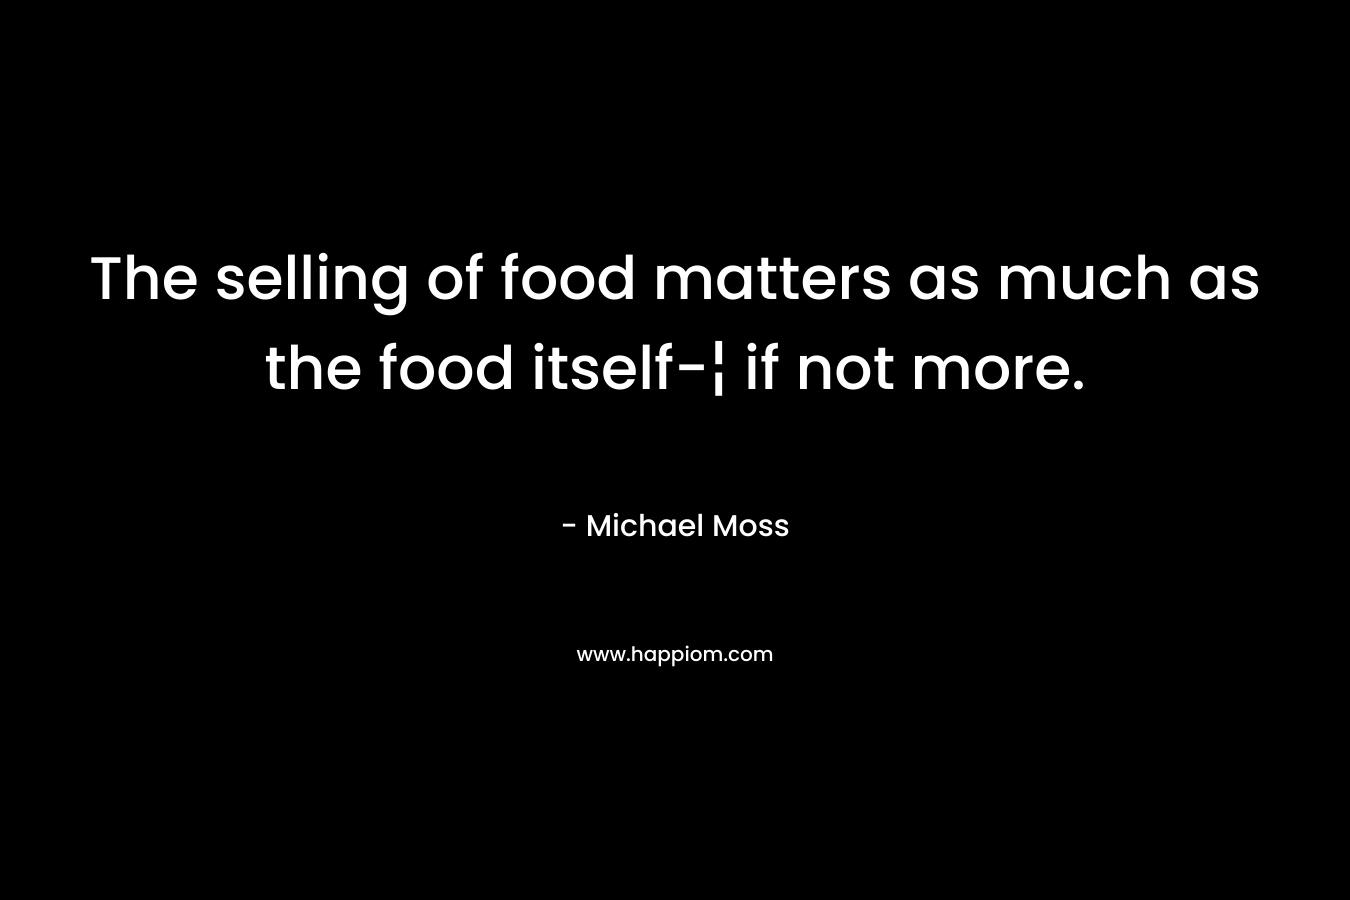 The selling of food matters as much as the food itself-¦ if not more.